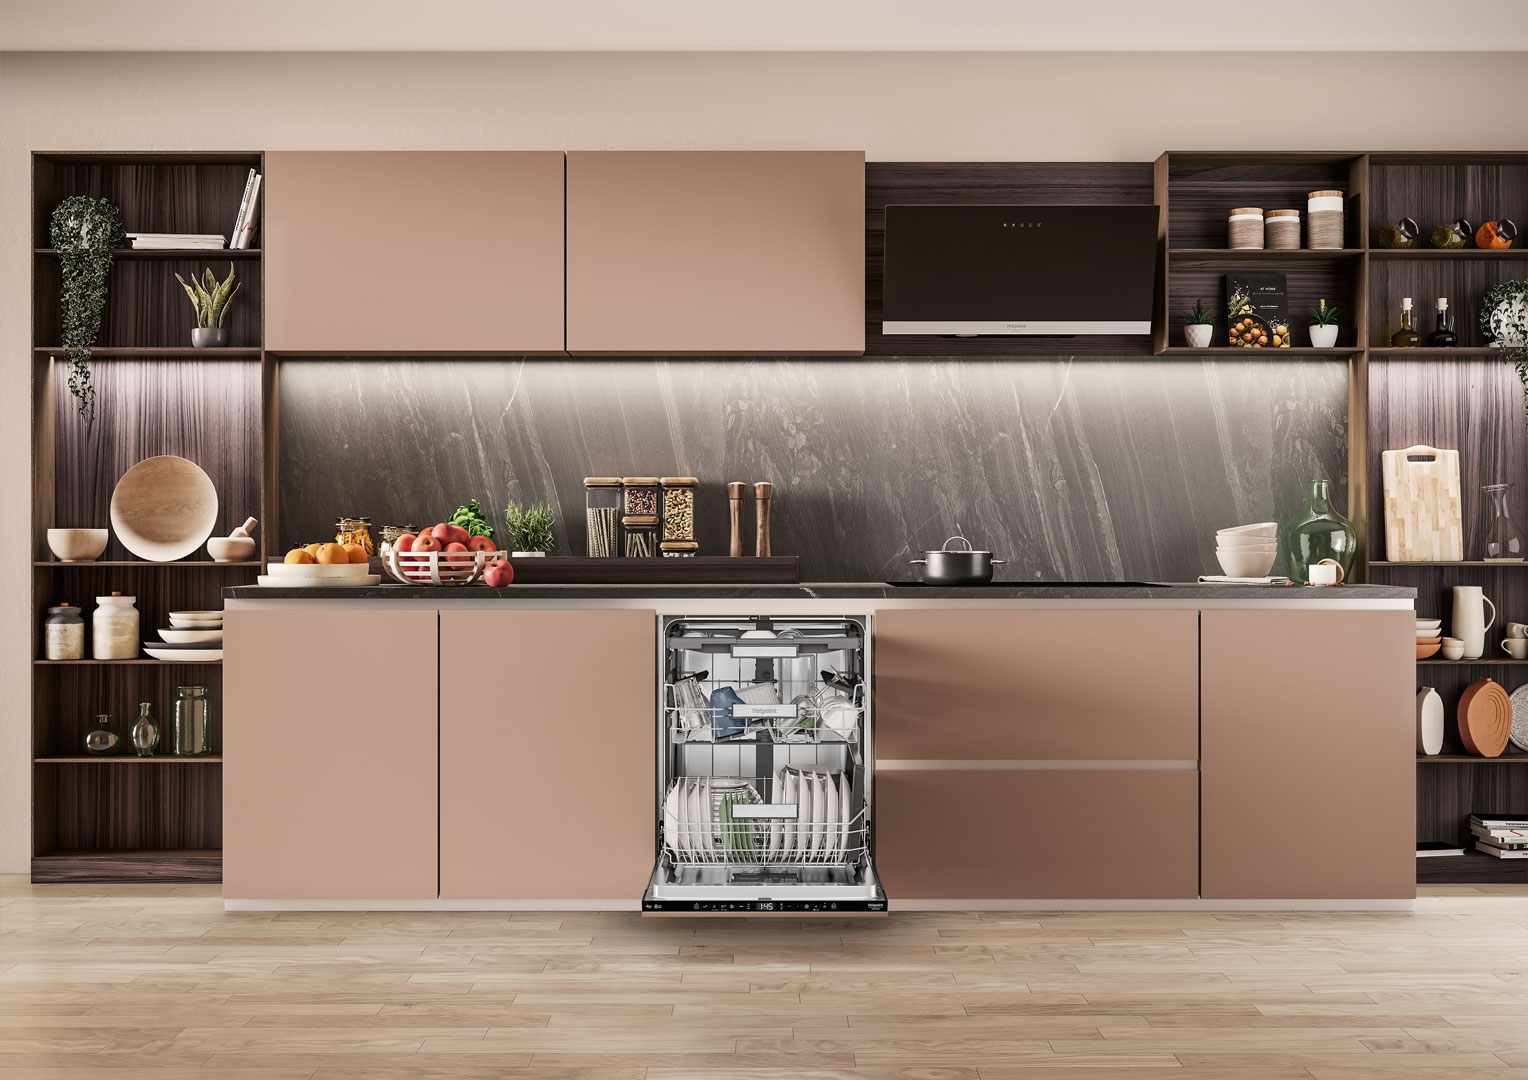 The MaxiSpace dishwasher by Hotpoint gives clean and shiny dishes with no pre-rinsing